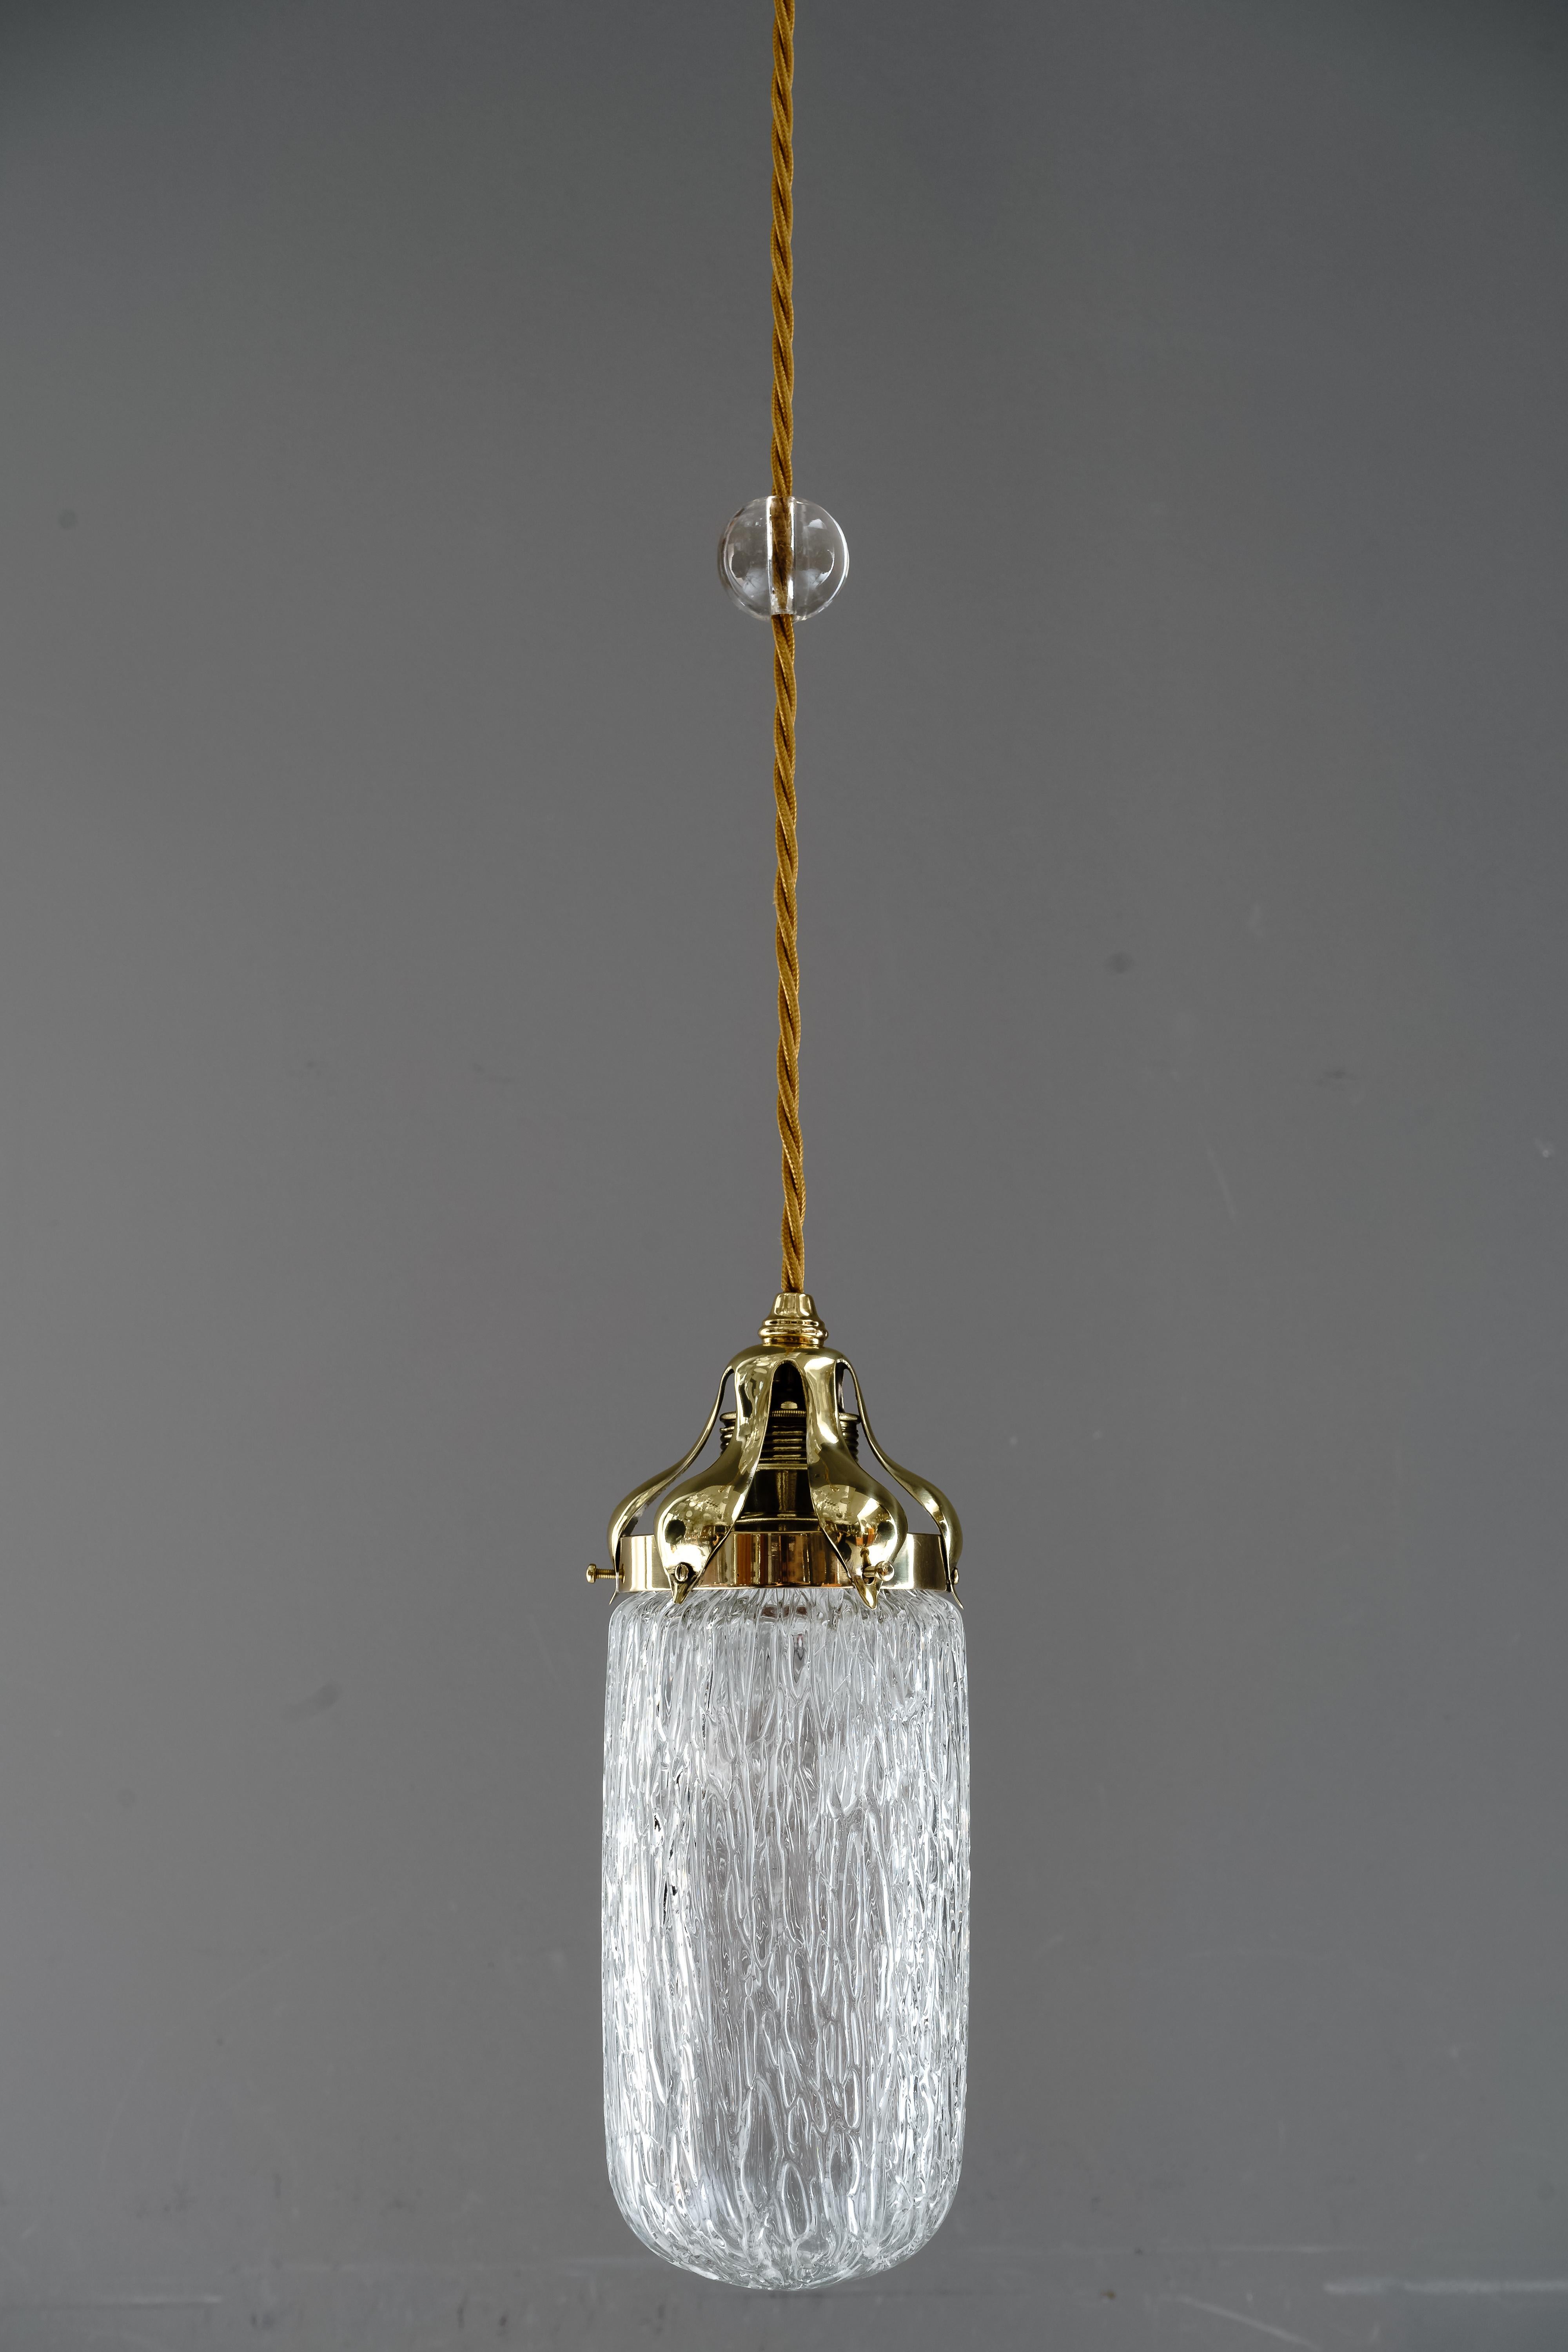 Leopold Bauer Hanging Lamp with Loetz Witwe “Blitzglas” Shade, circa 1905 In Good Condition For Sale In Wien, AT